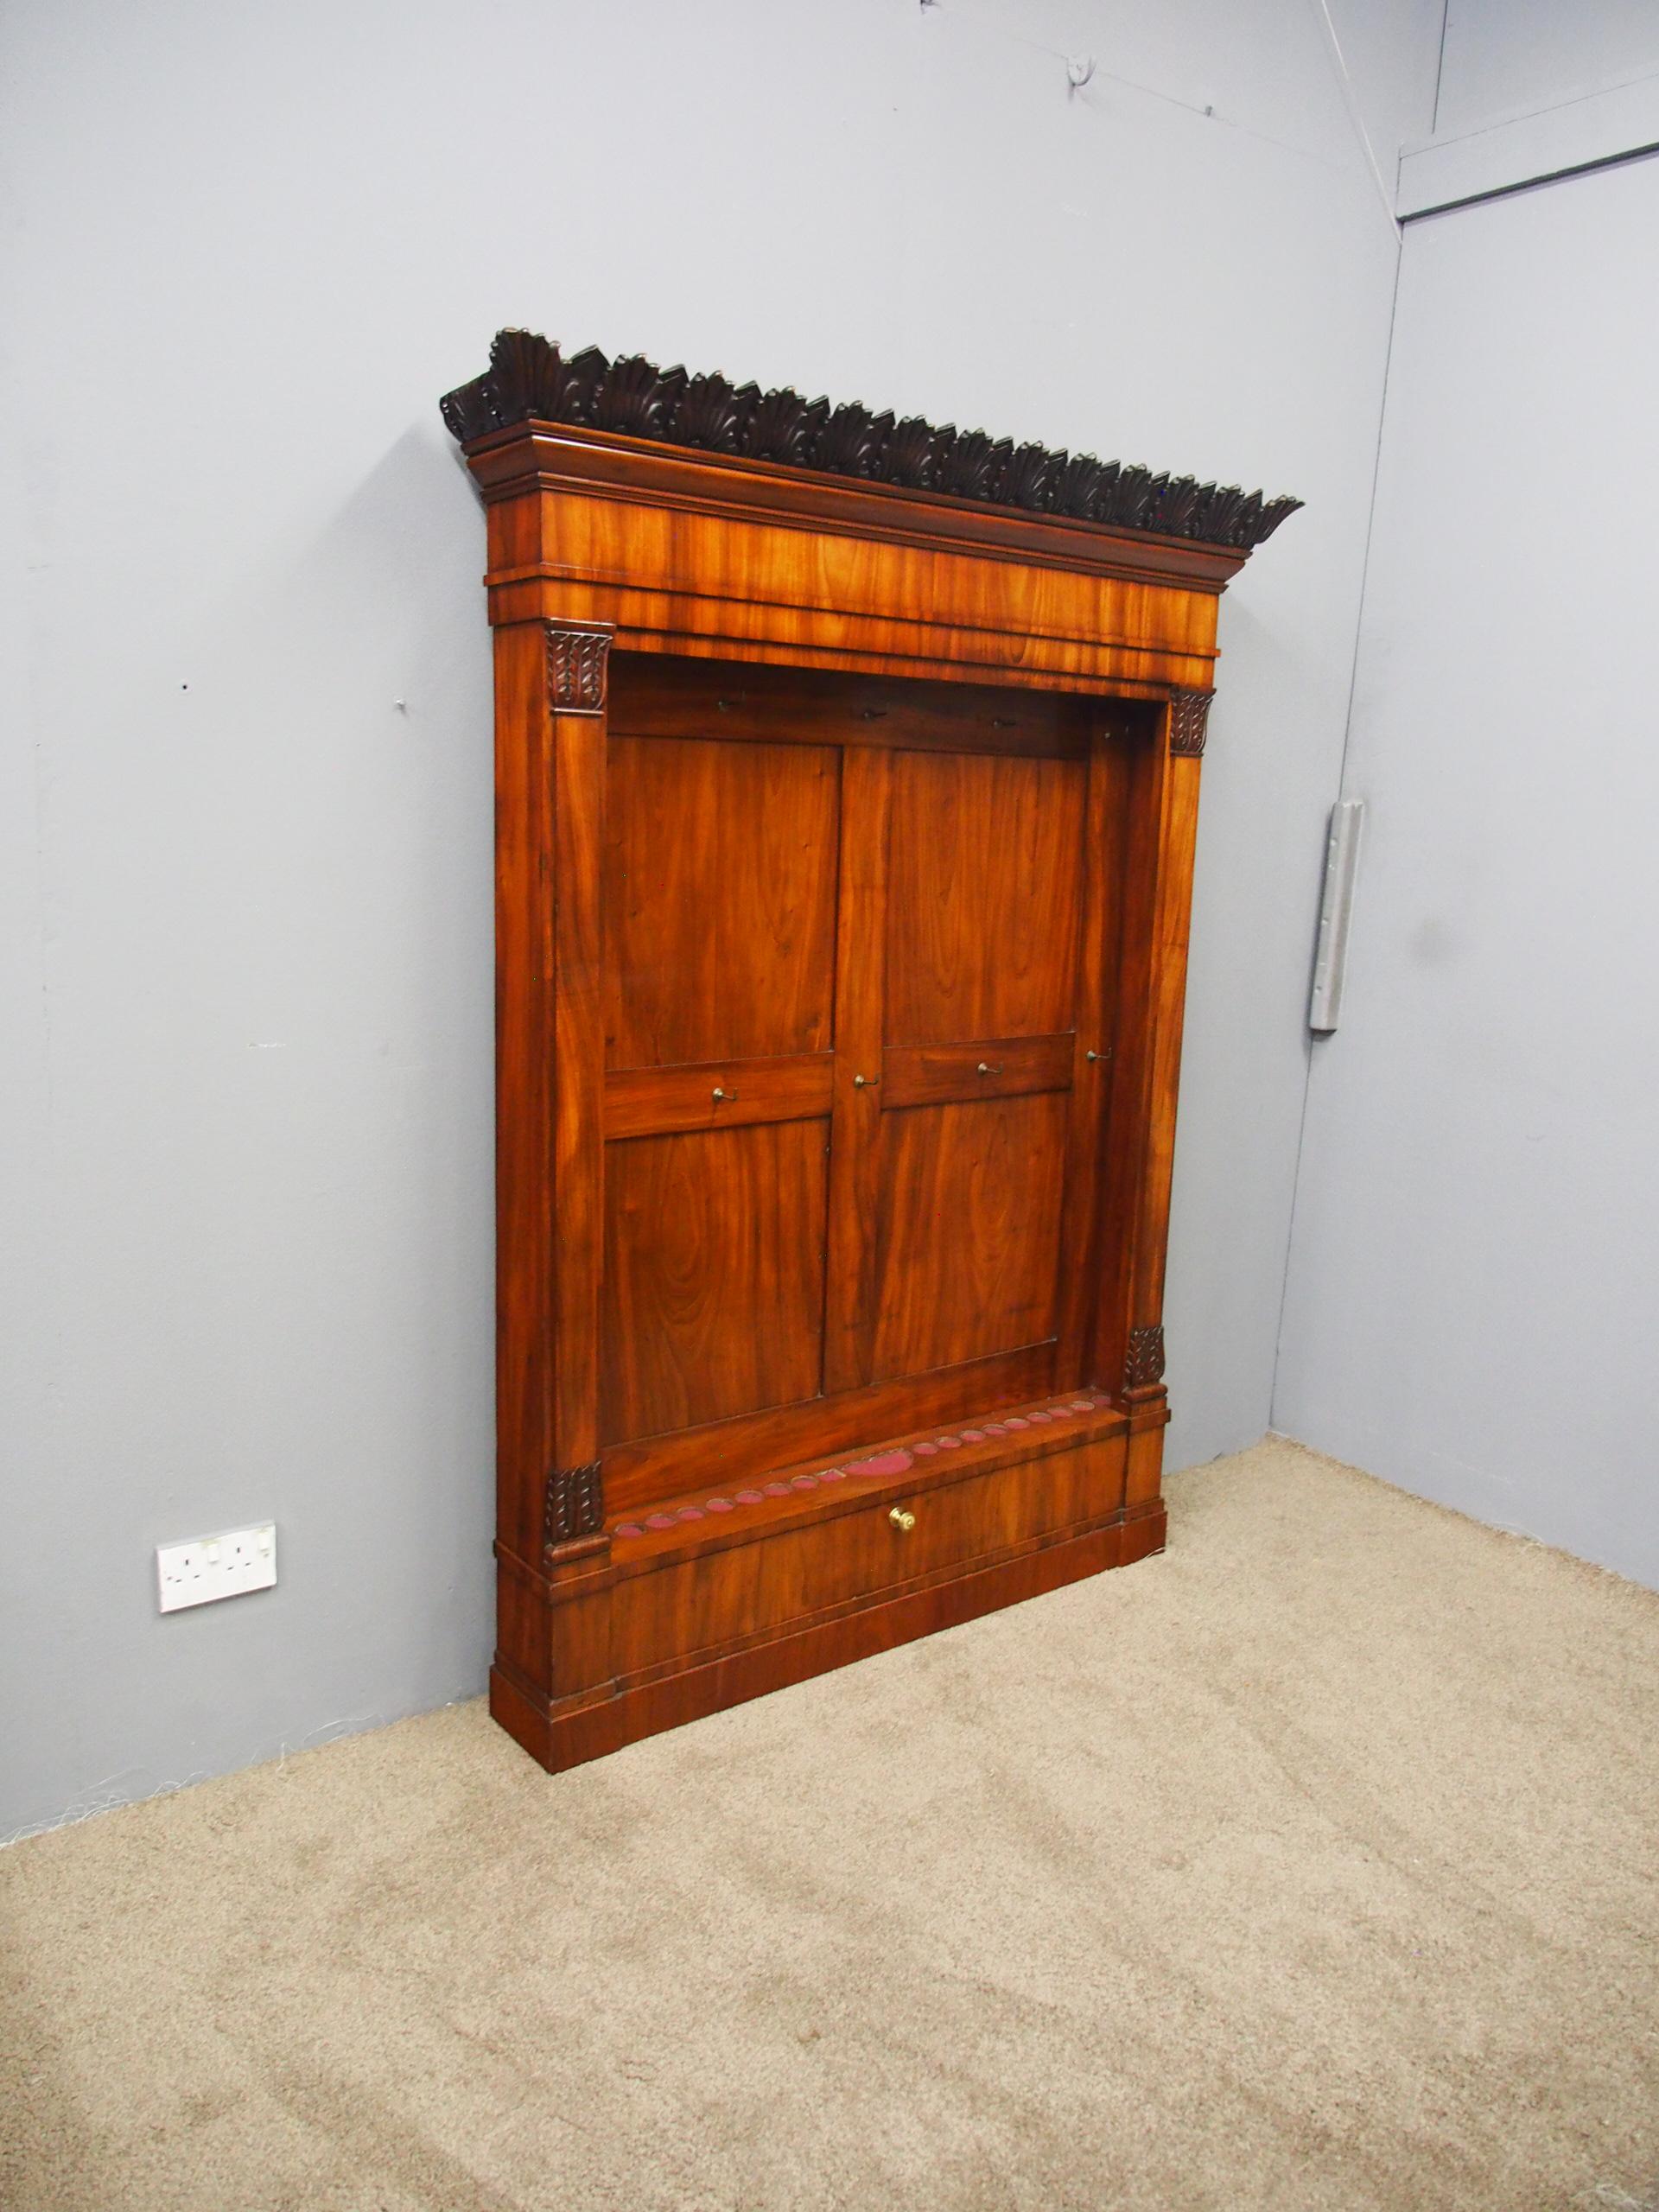 William IV mahogany cue rack or stand, circa 1840. With a hand-carved, acanthus leaf design to the pediment and cornice above a shaped flame mahogany frieze, leading on to further acanthus leaf carving to the pilasters either side. The recess is in